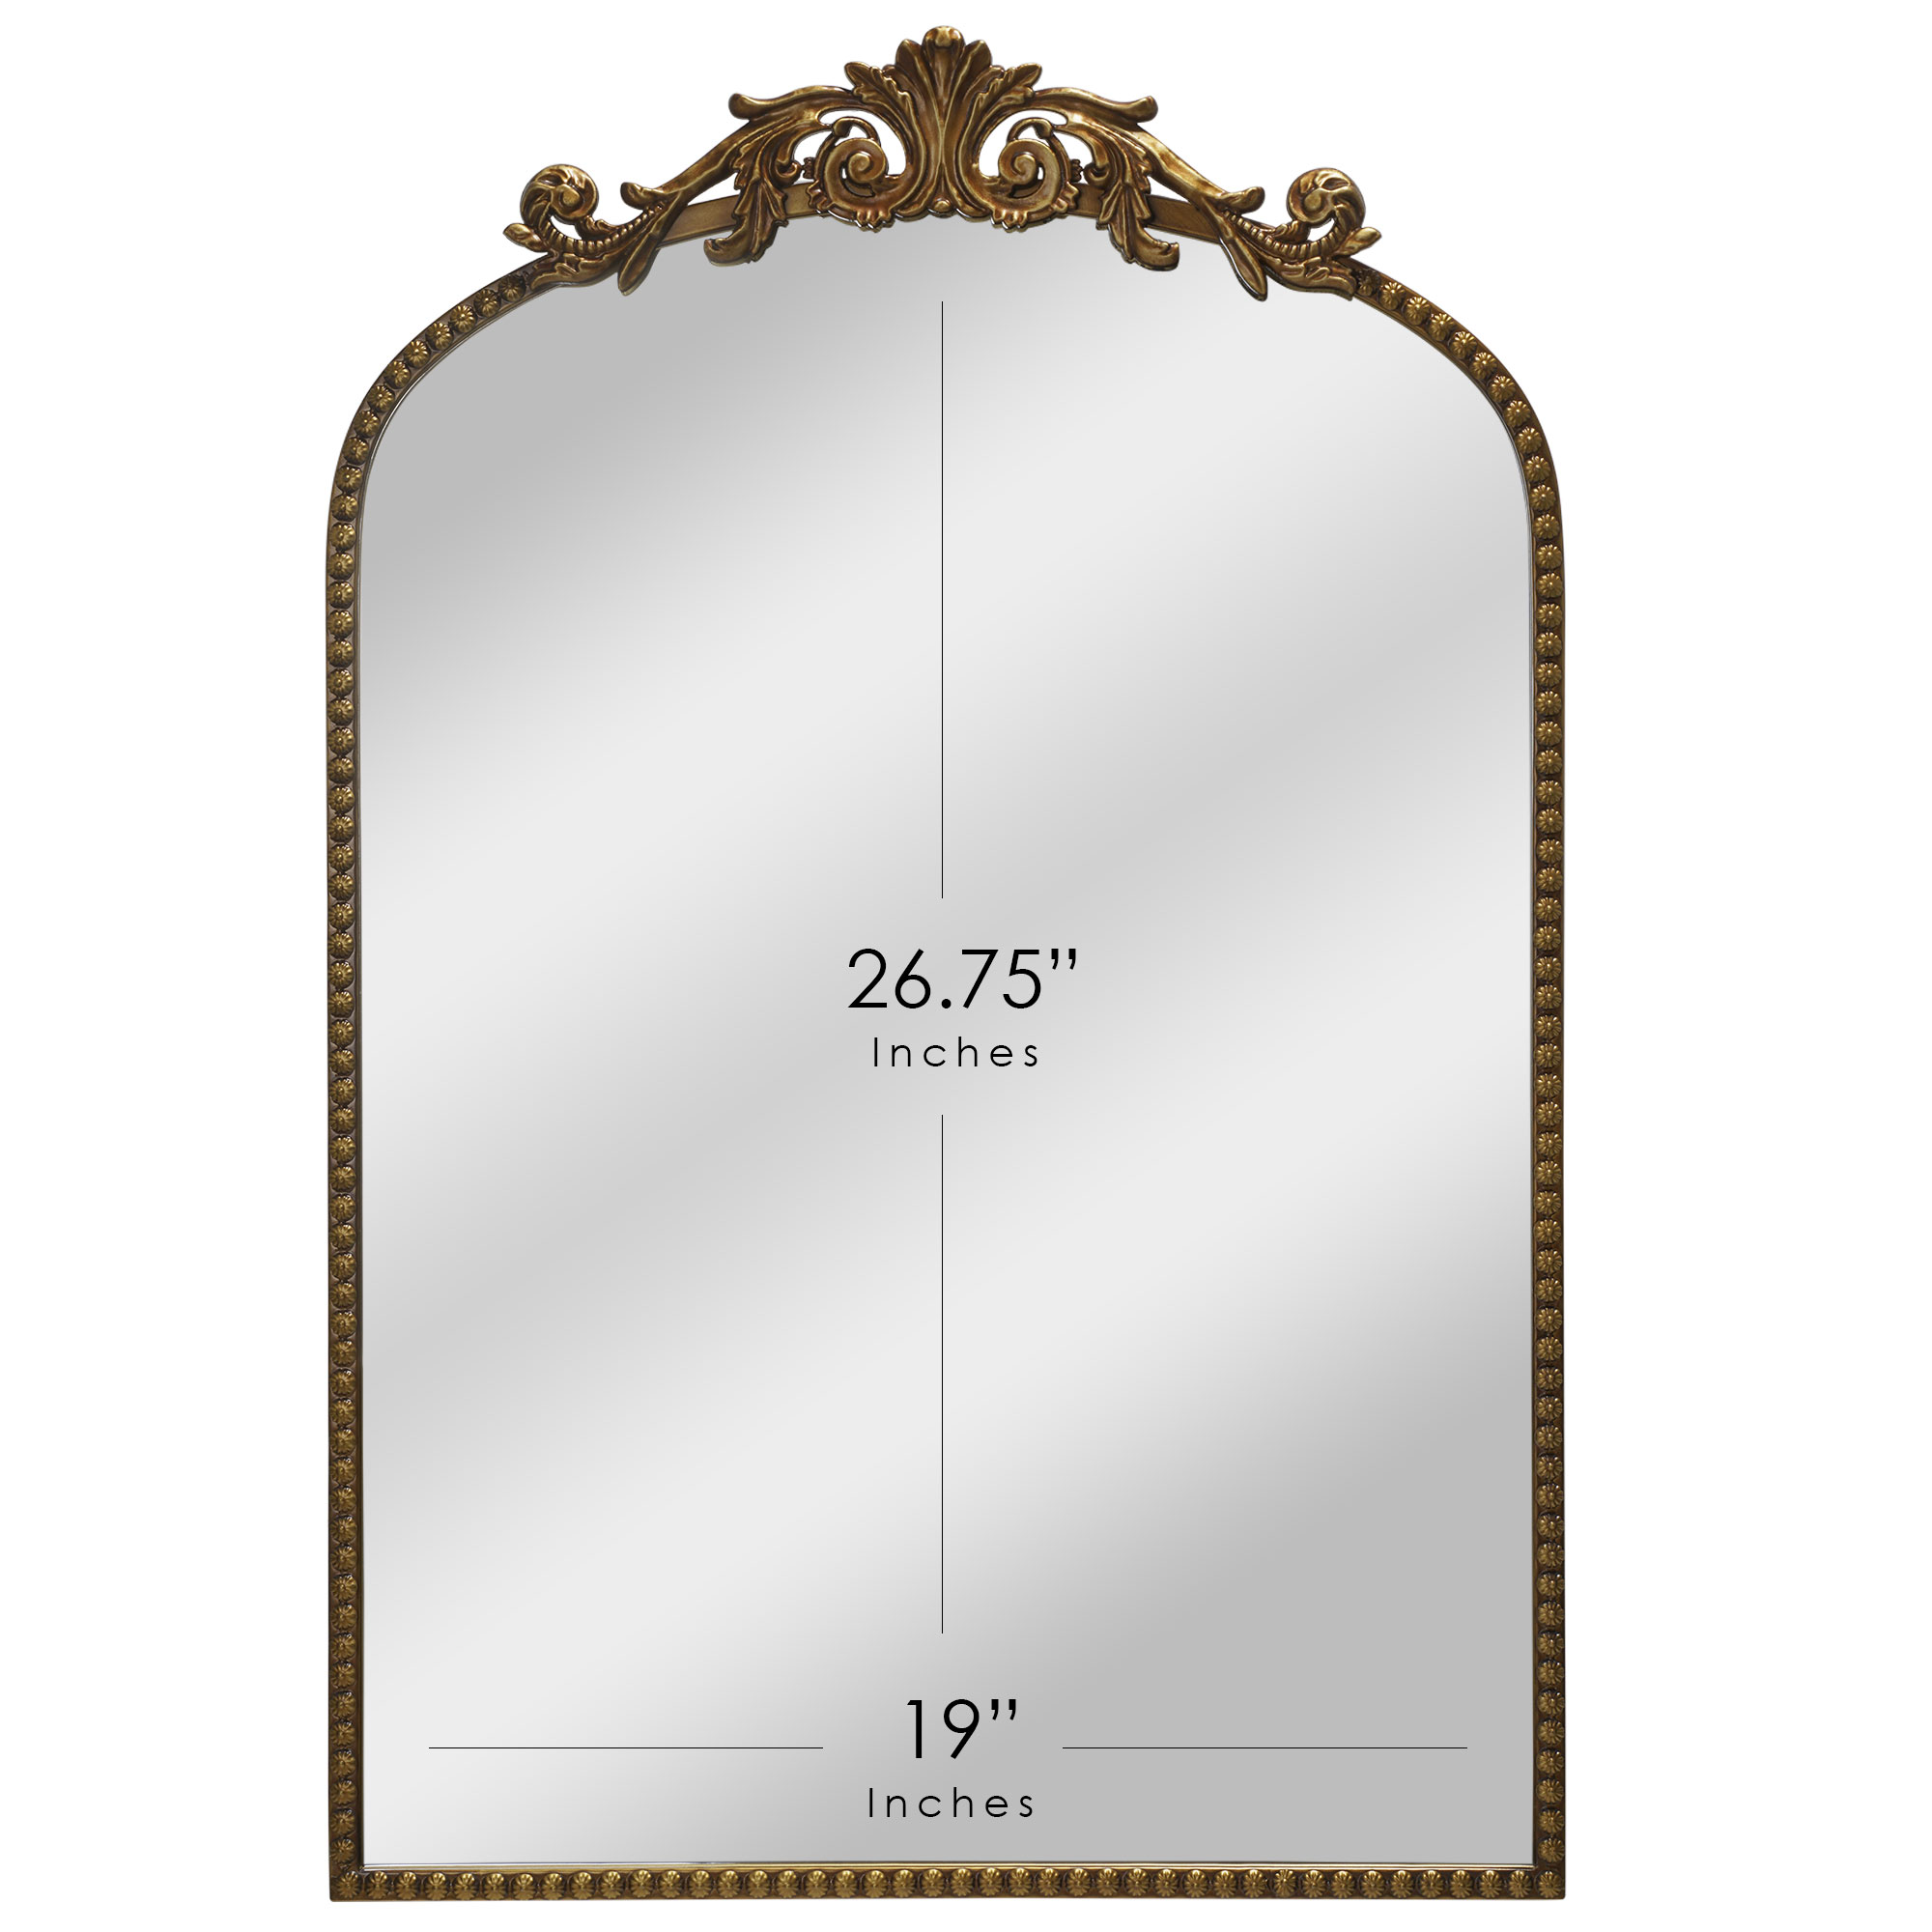 Better Homes & Gardens 20" x 30" Filigree Arch Metal Wall Mirror Decor in Gold - image 5 of 6